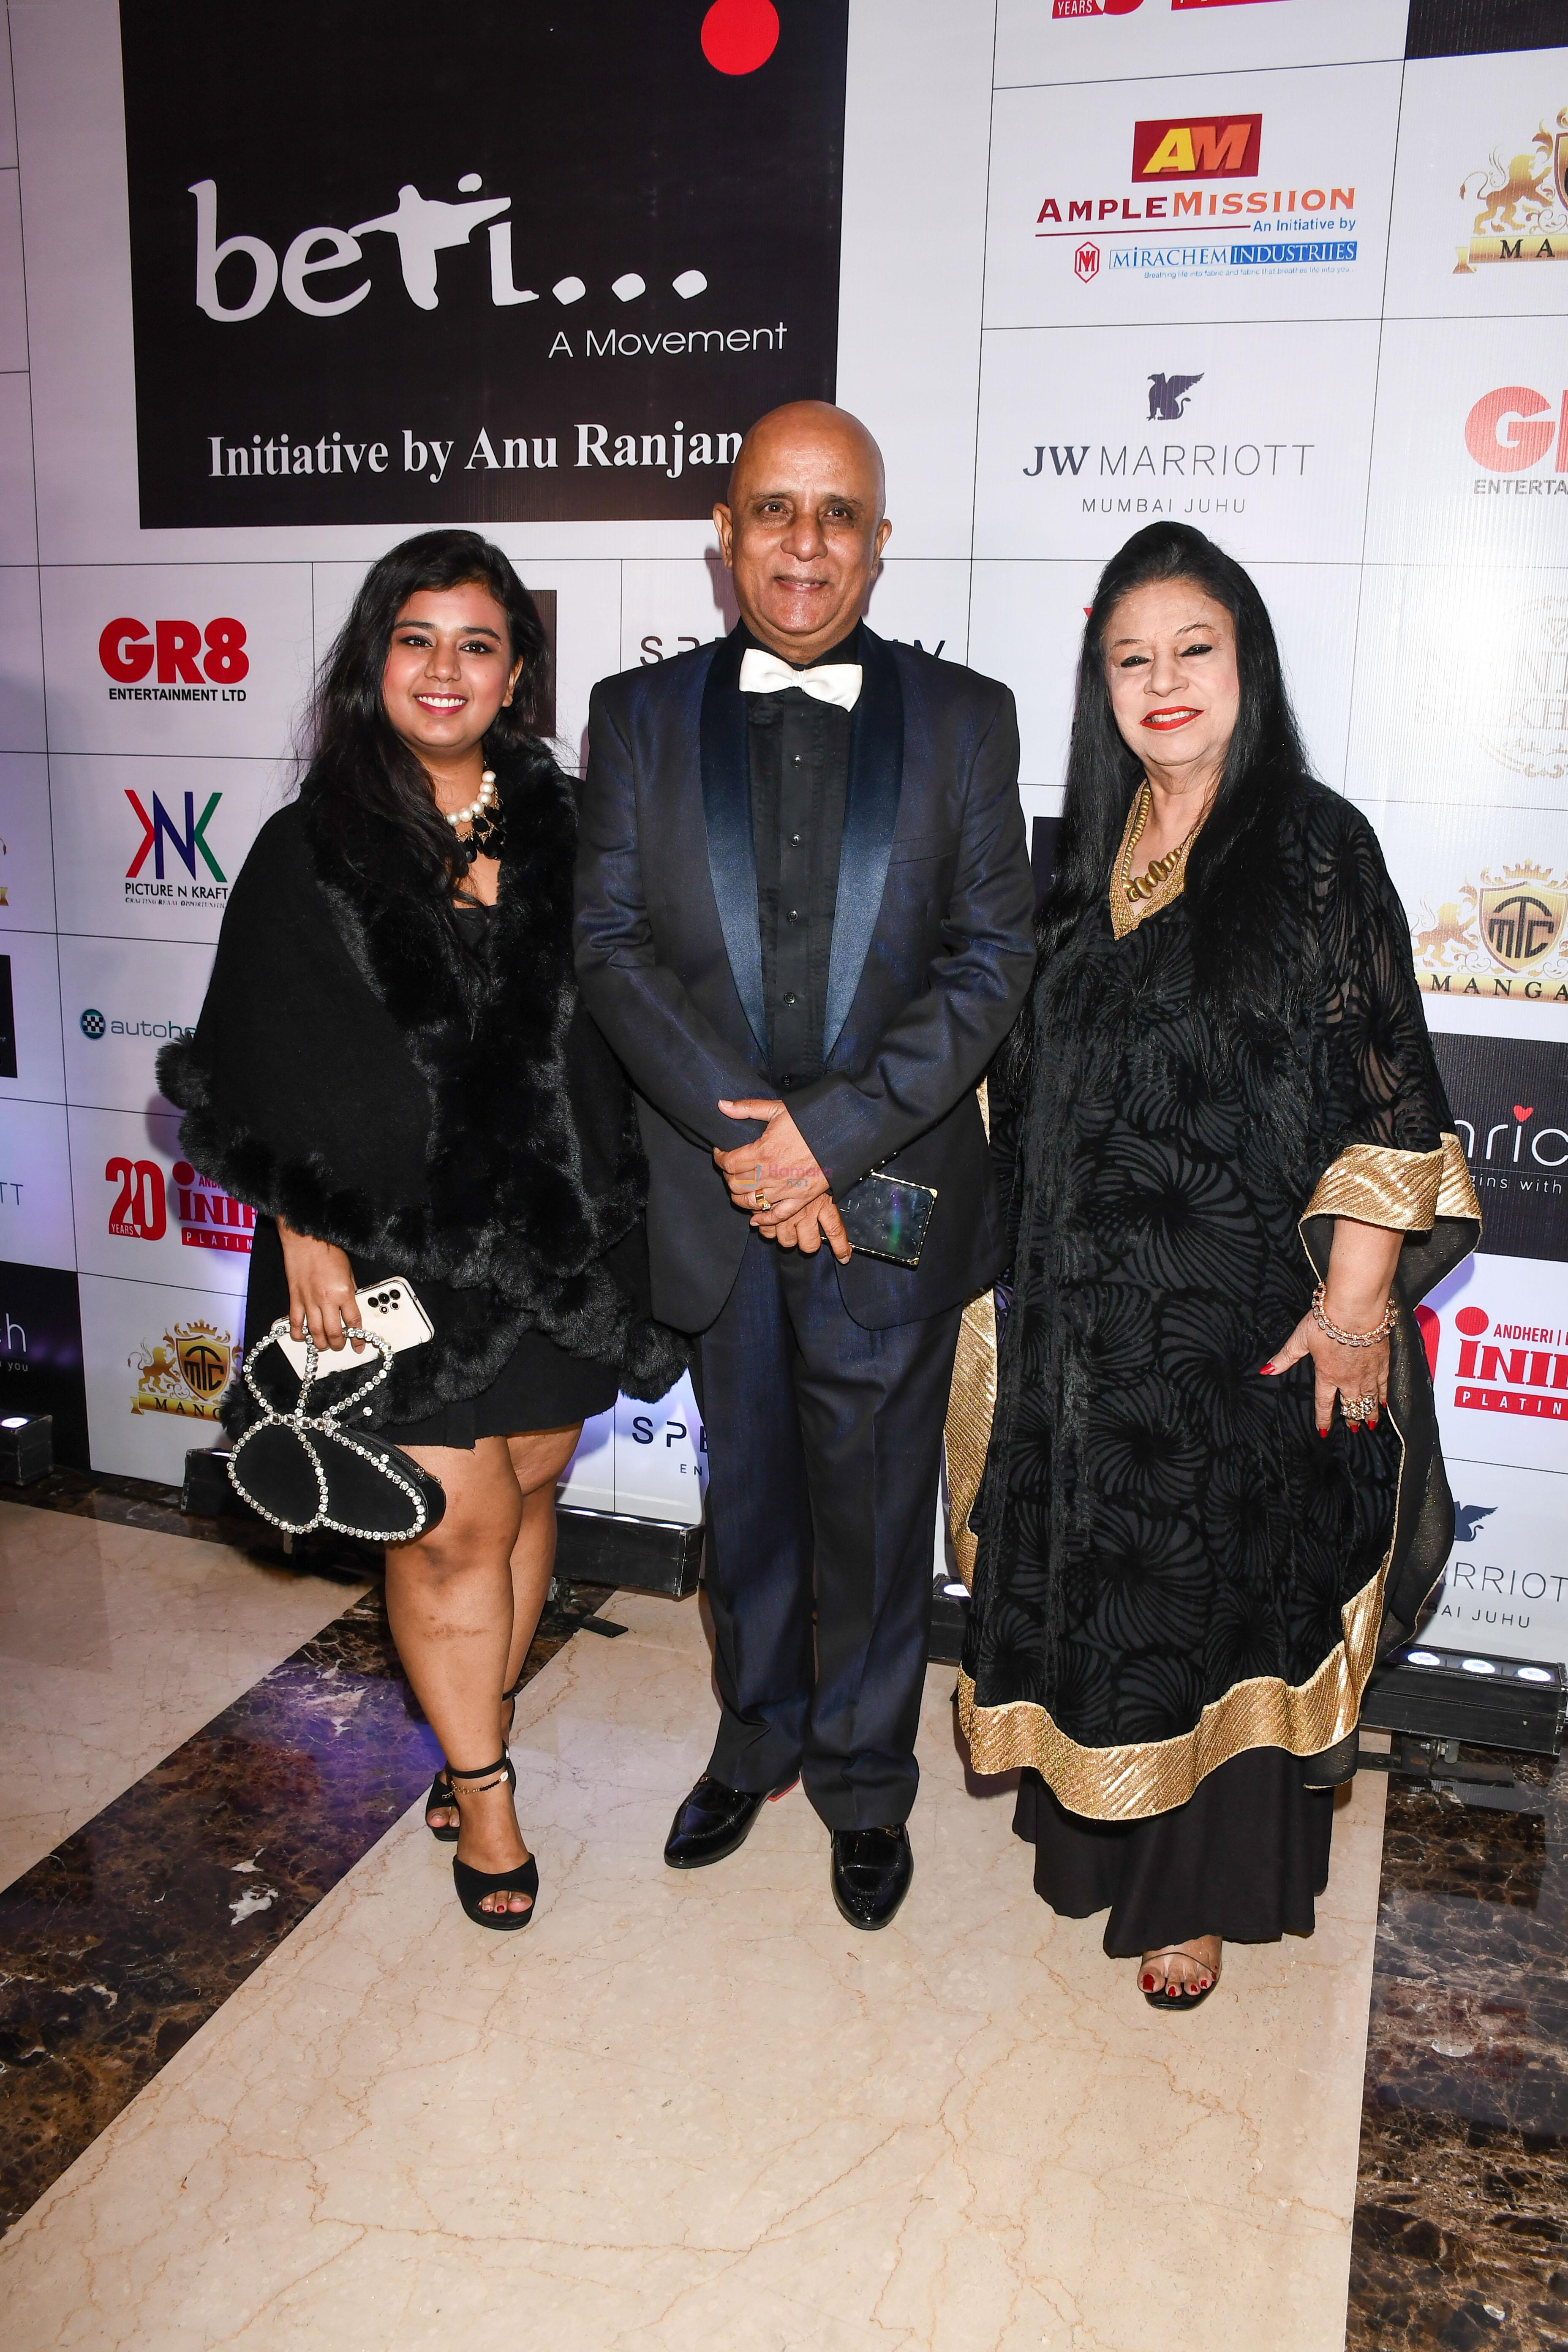 Rajesh Puri during 17th Edition of BETI A Fashion Fundraiser Show on 14 May 2023